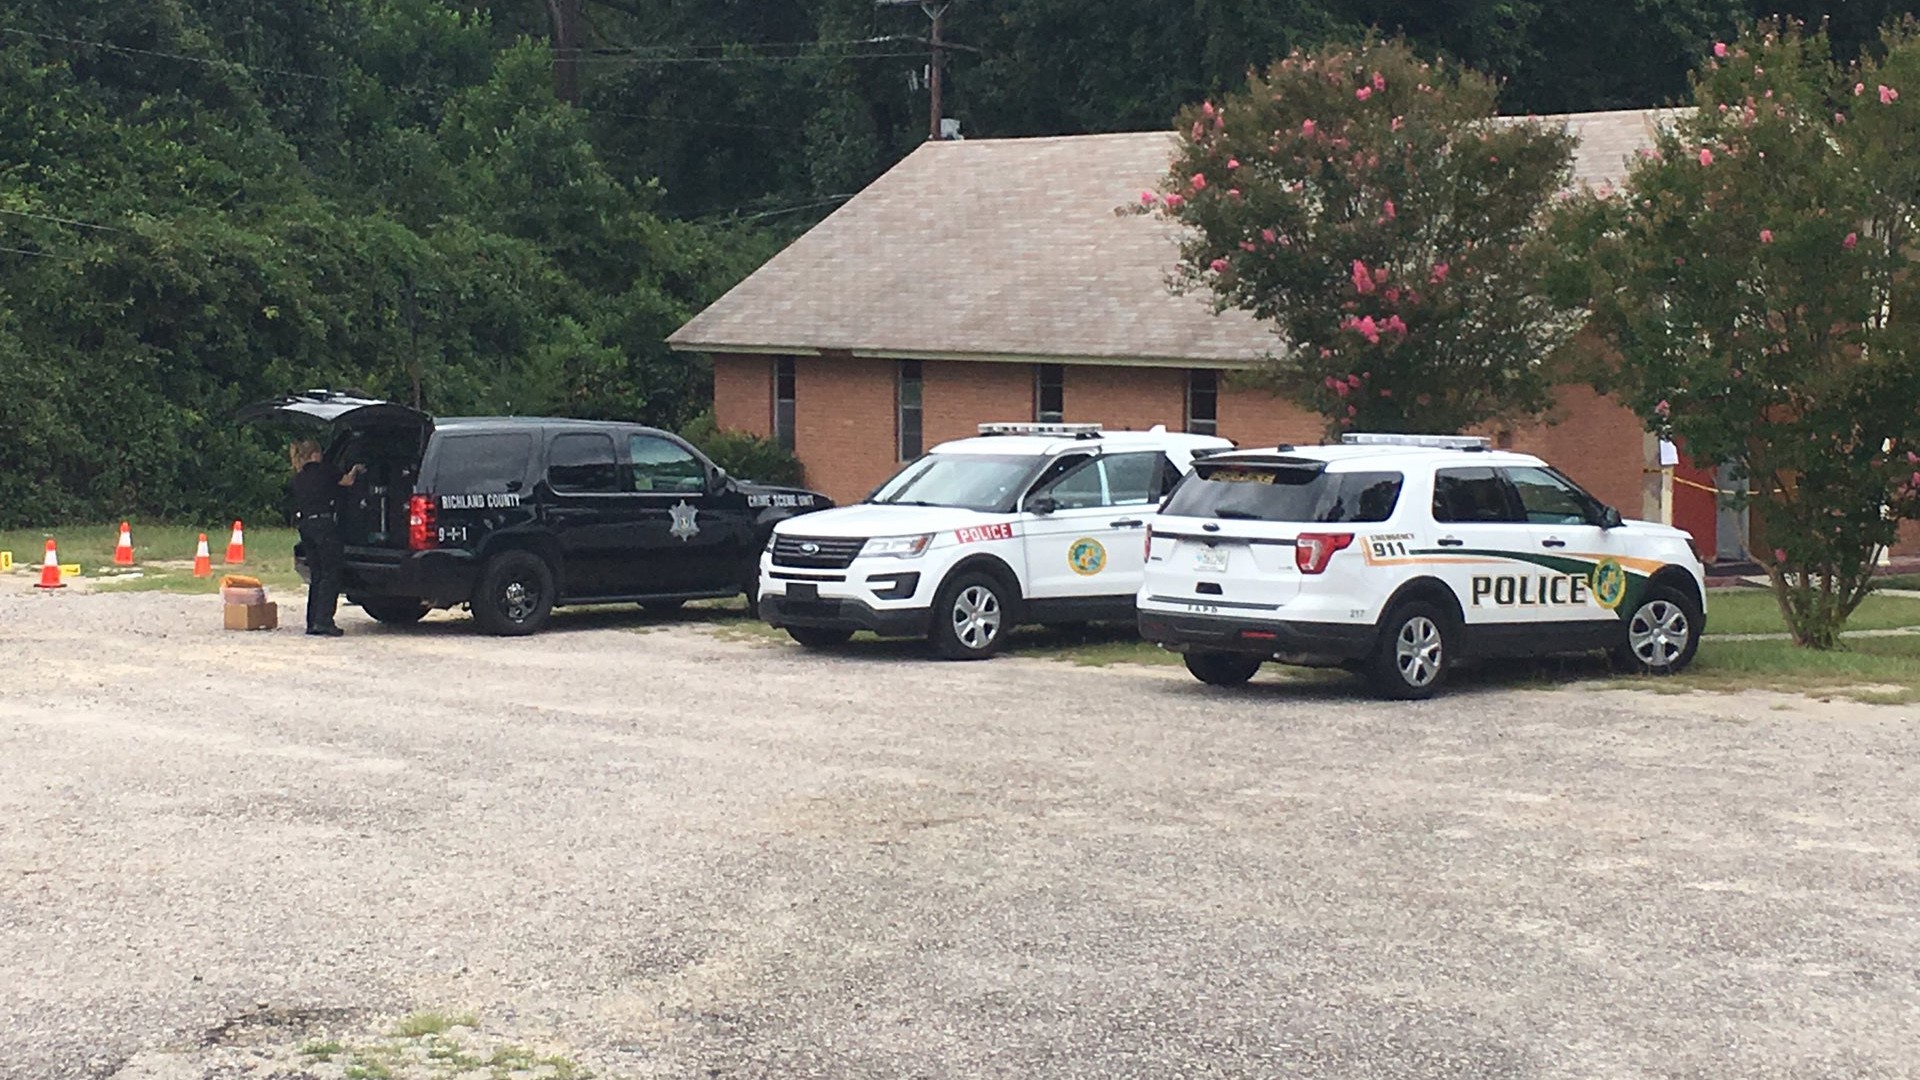 The Forest Acres Police Department is searching for a suspect in an early morning robbery and shooting incident at a church in Columbia.